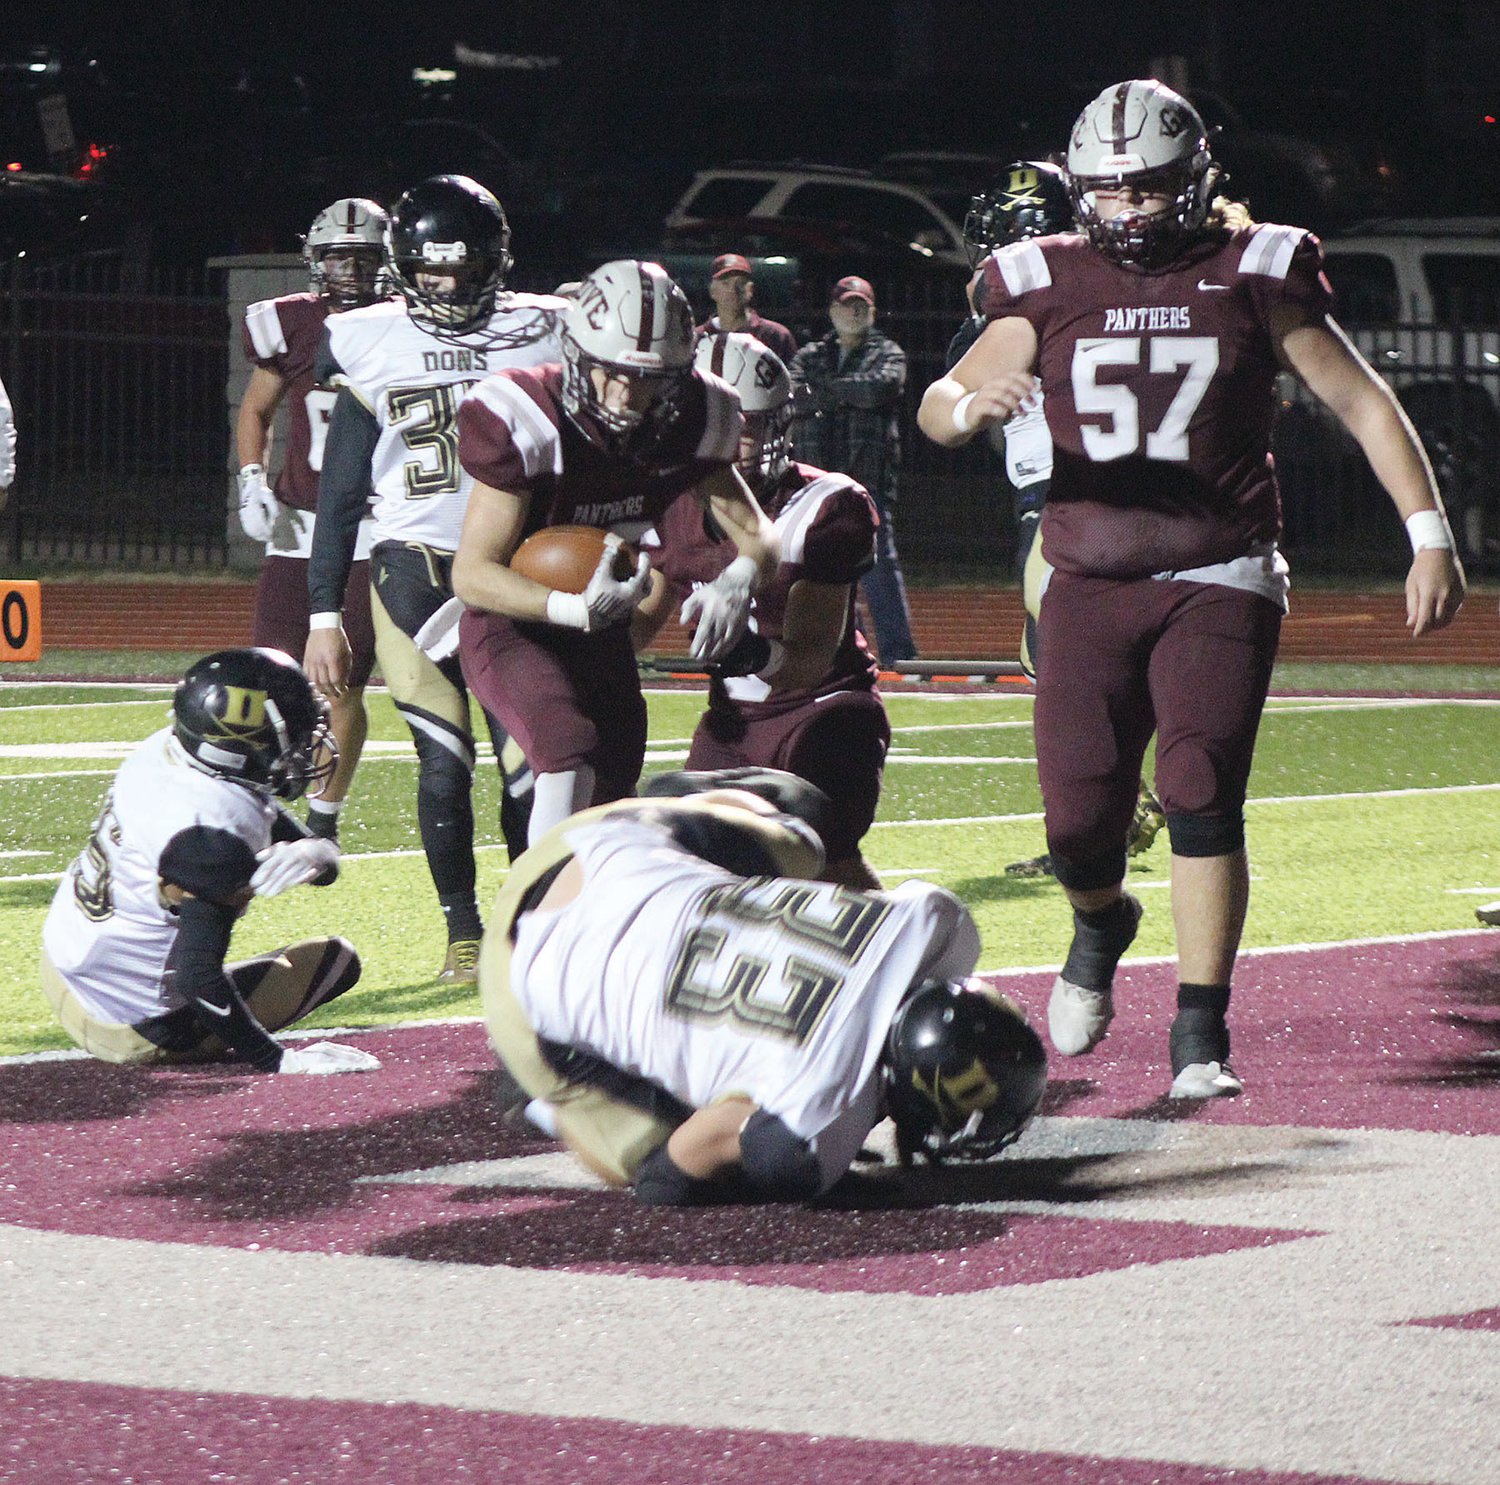 Mountain Grove’s Deveyn Martin plows into the end zone as two Doniphan players lay on the ground in the end zone.